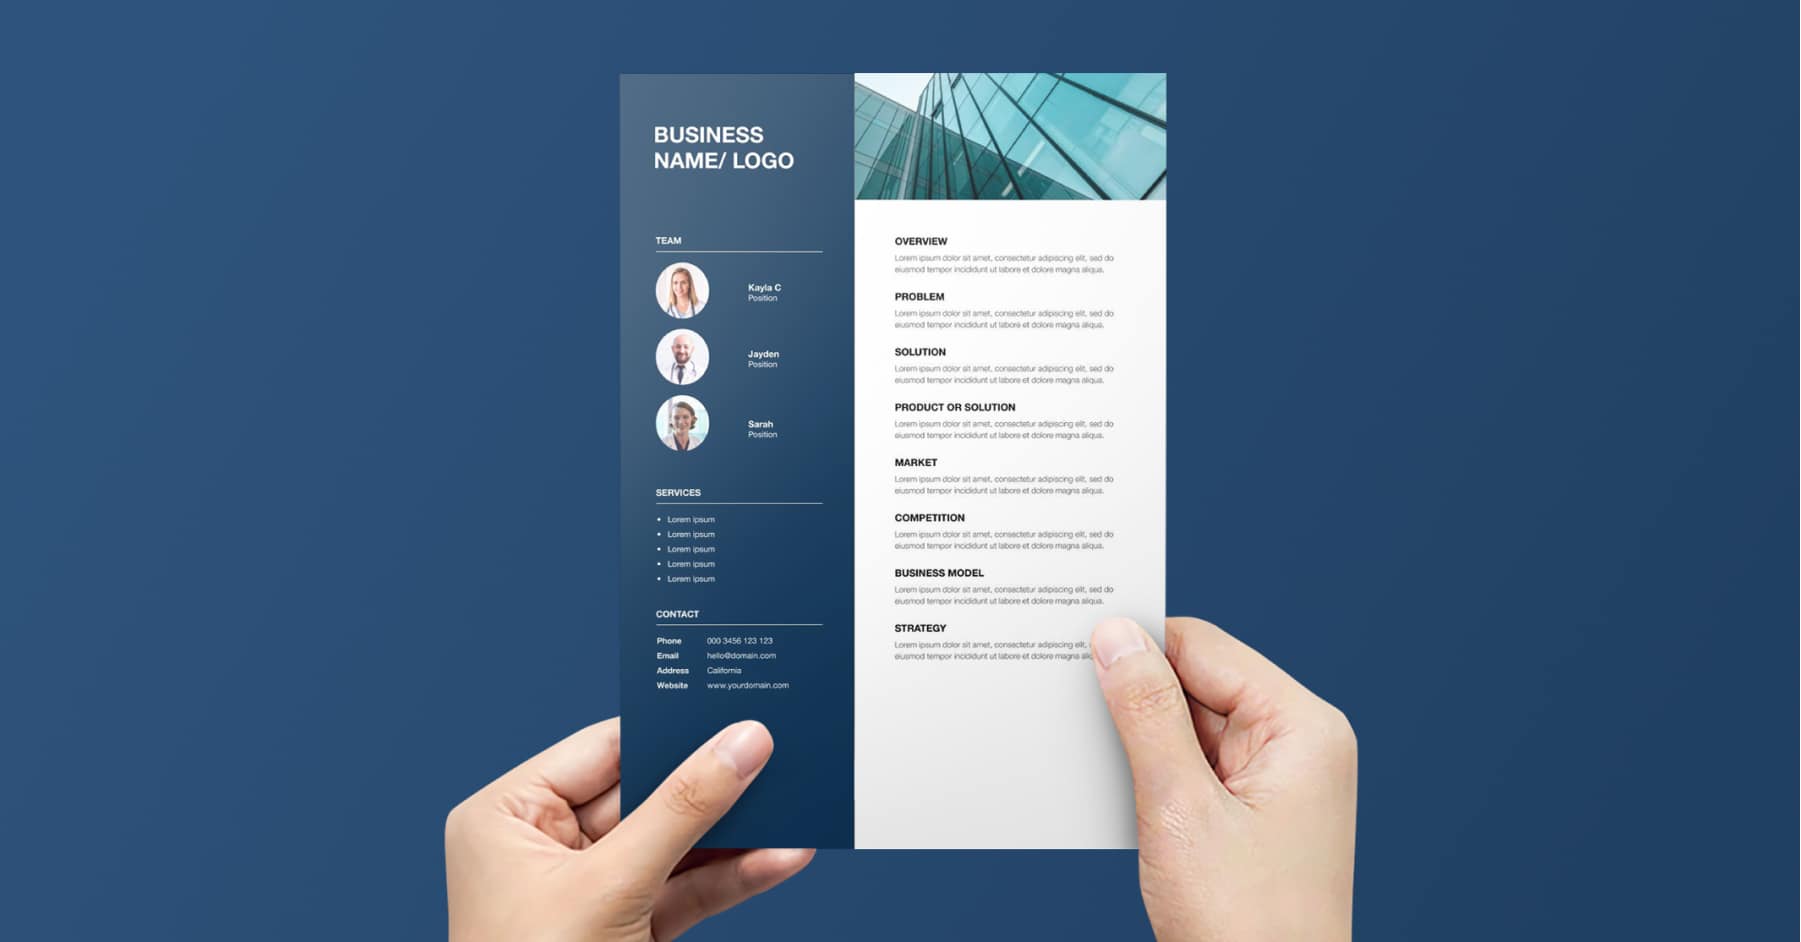 8 Business One Pager Design Tips & ideas + Free Templates